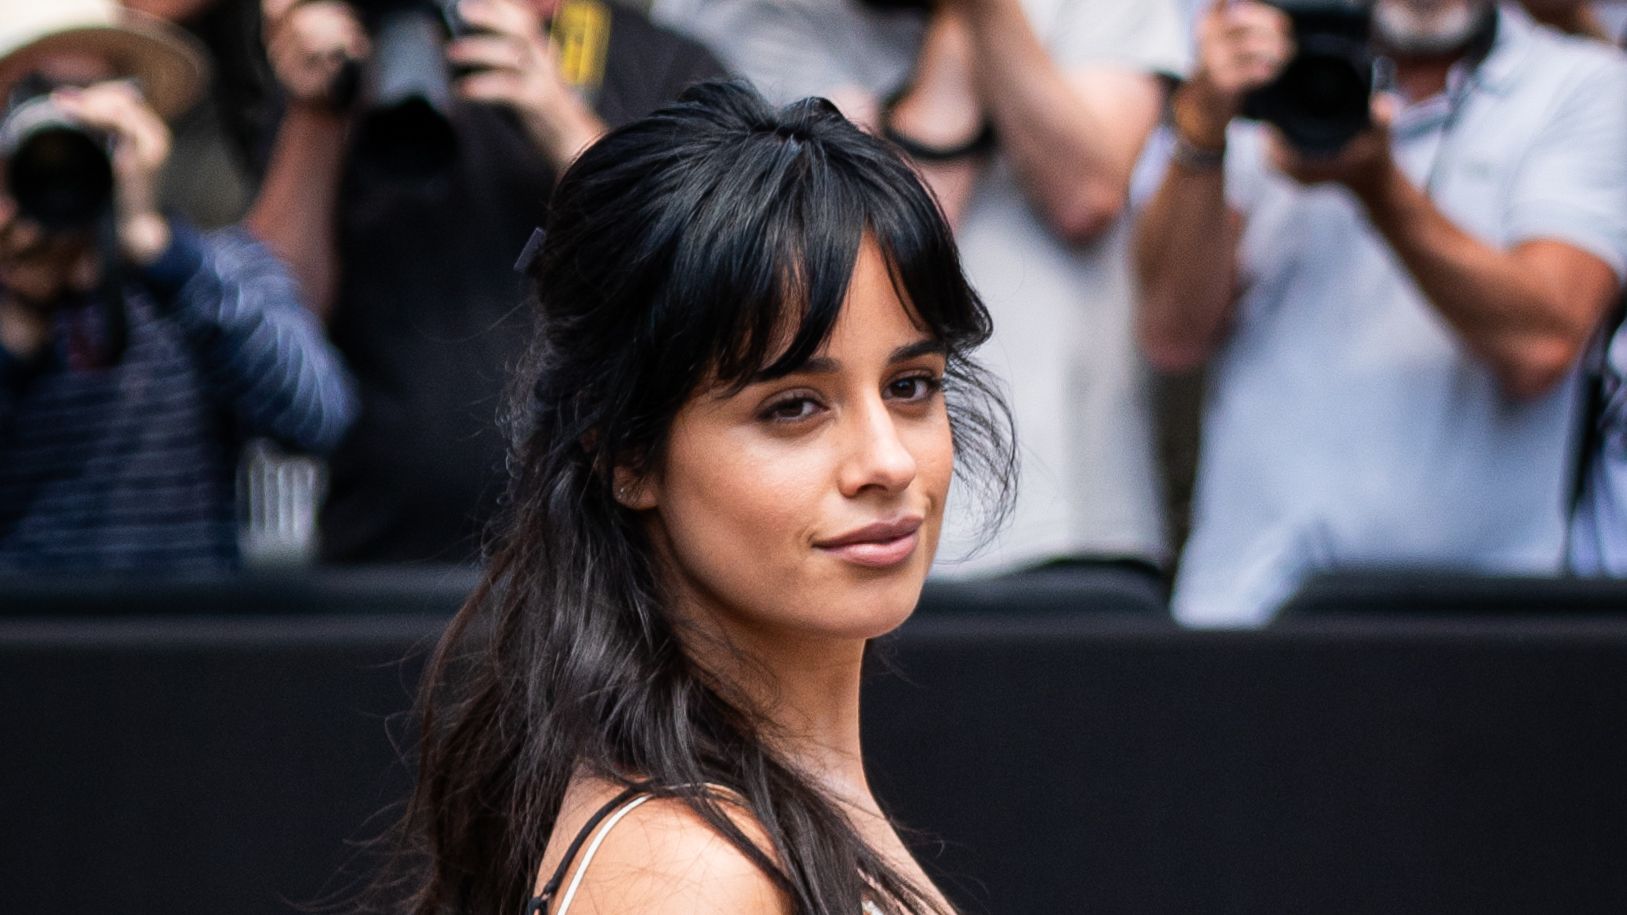 Camila Cabello Shows Off Strong Abs In Knit Bra Top In An IG Pic